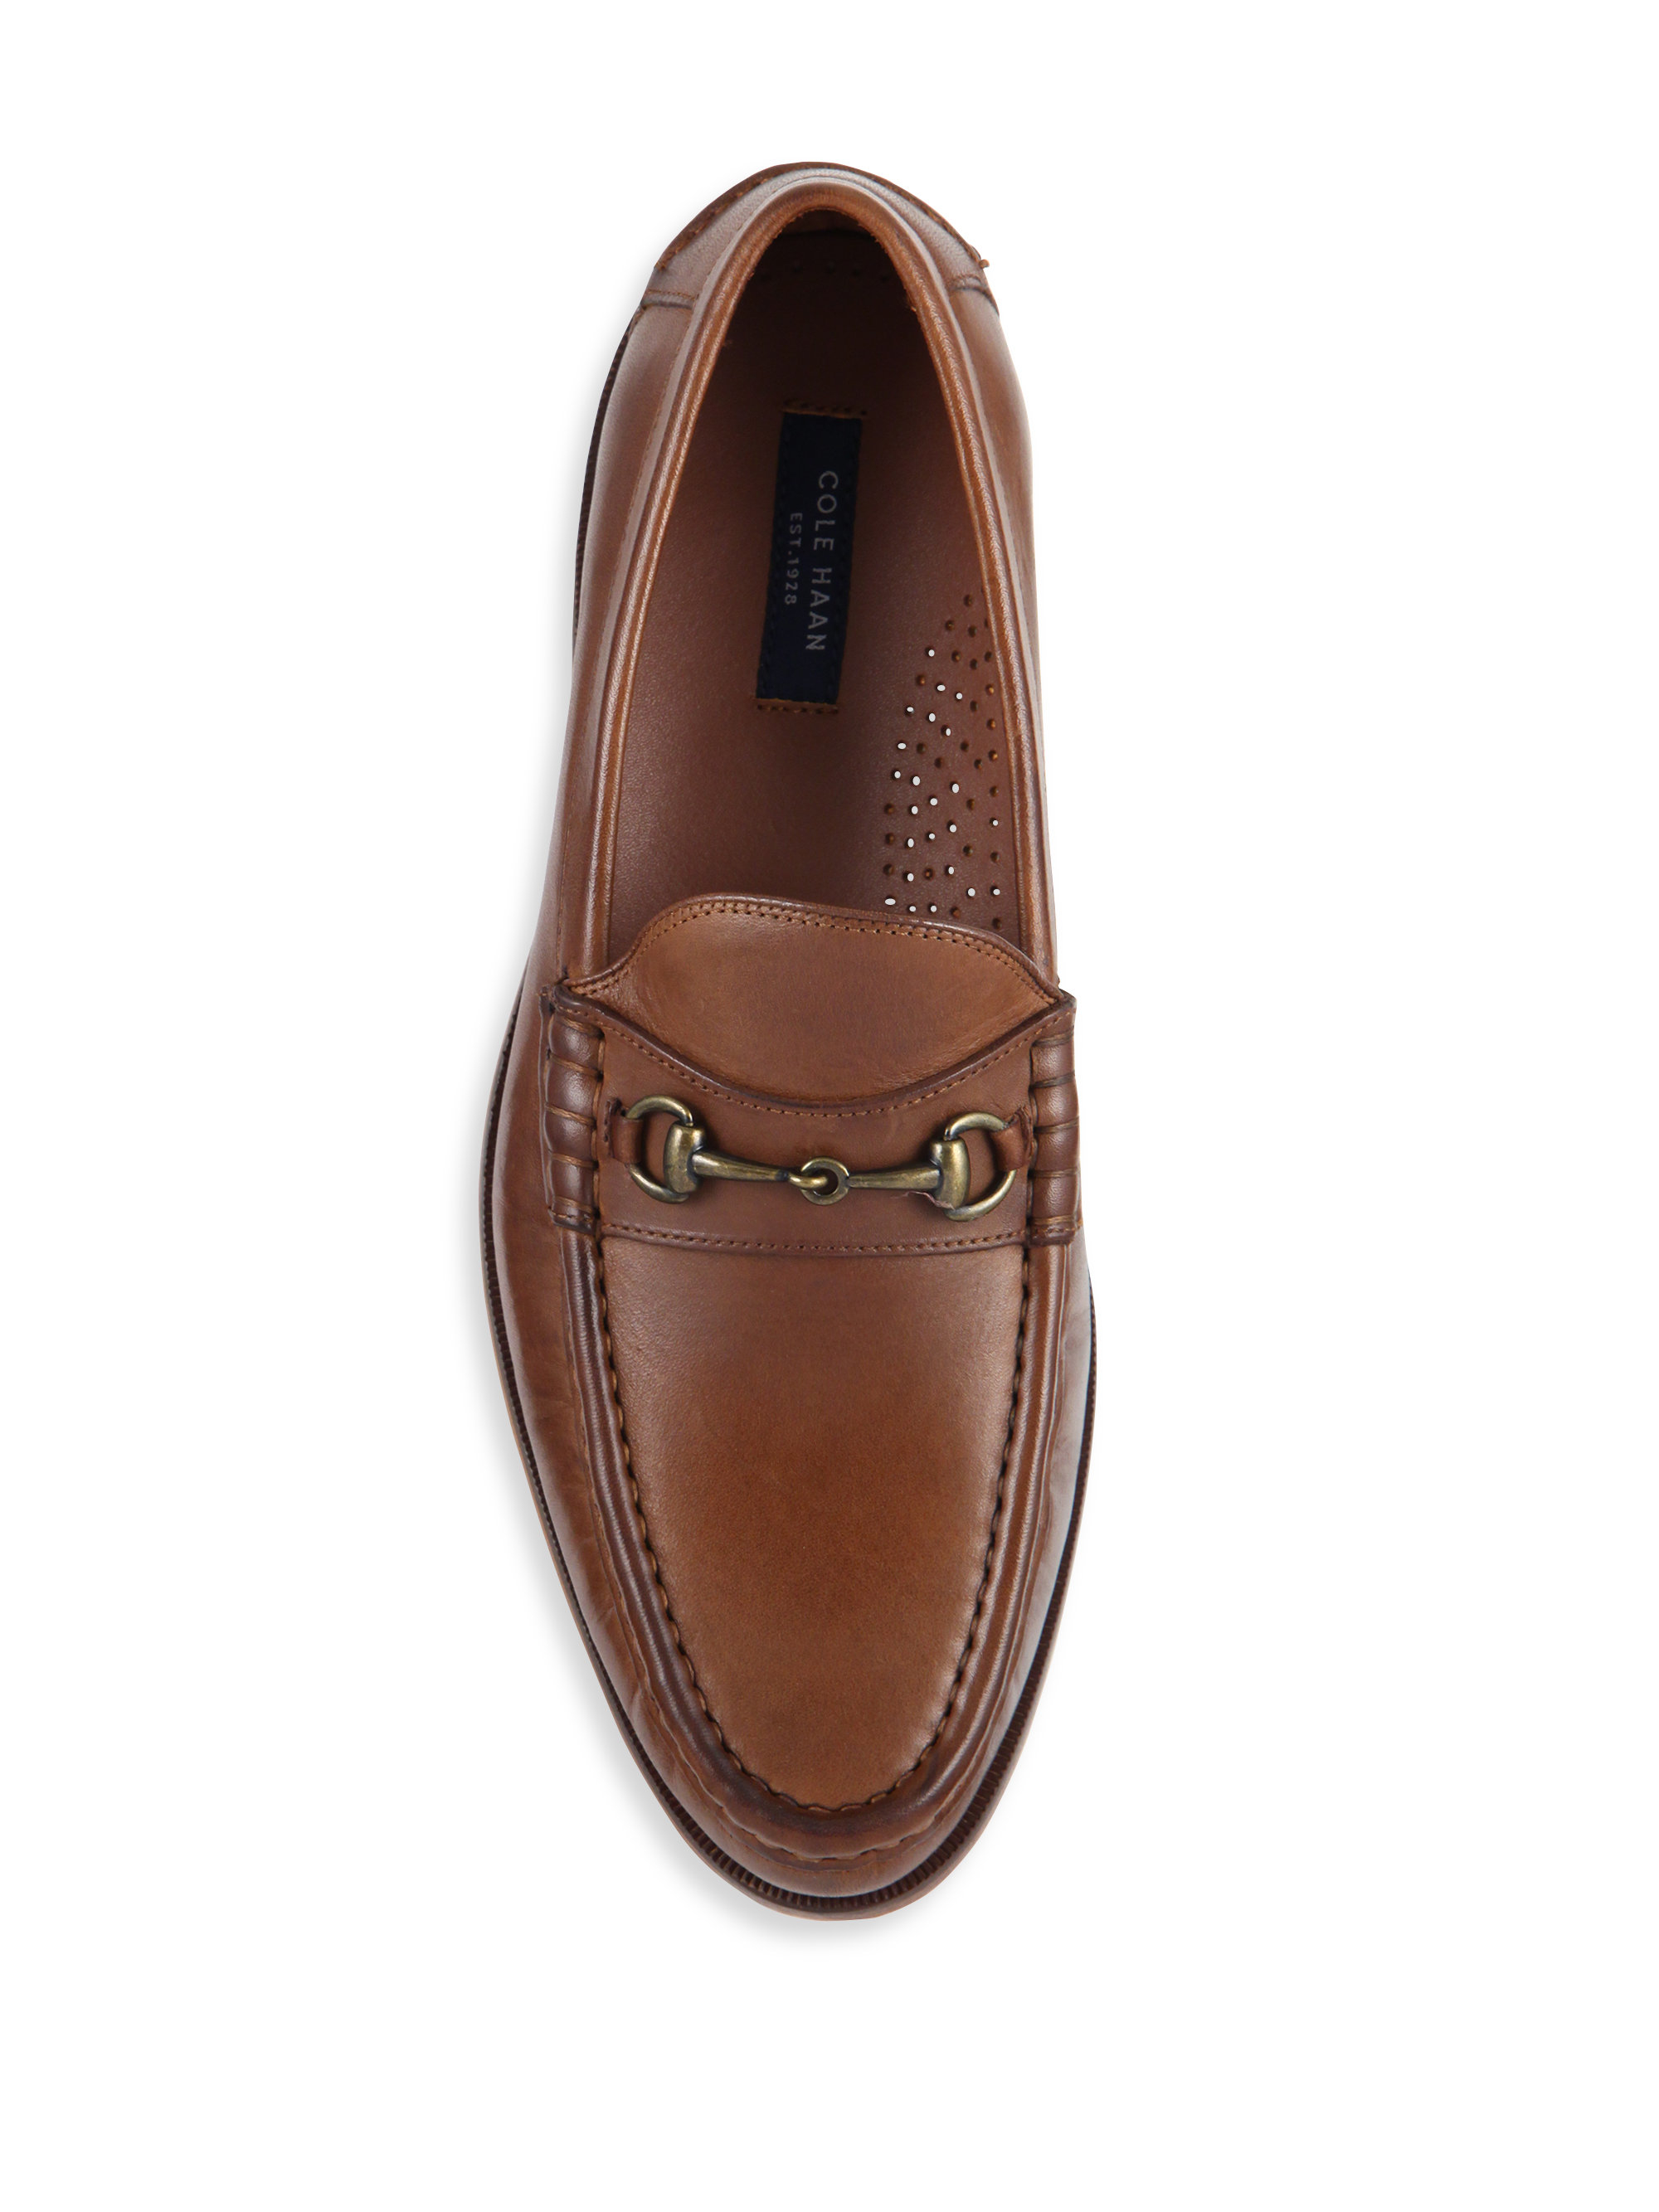 Lyst - Cole Haan Pinch Gotham Bit Loafers in Brown for Men